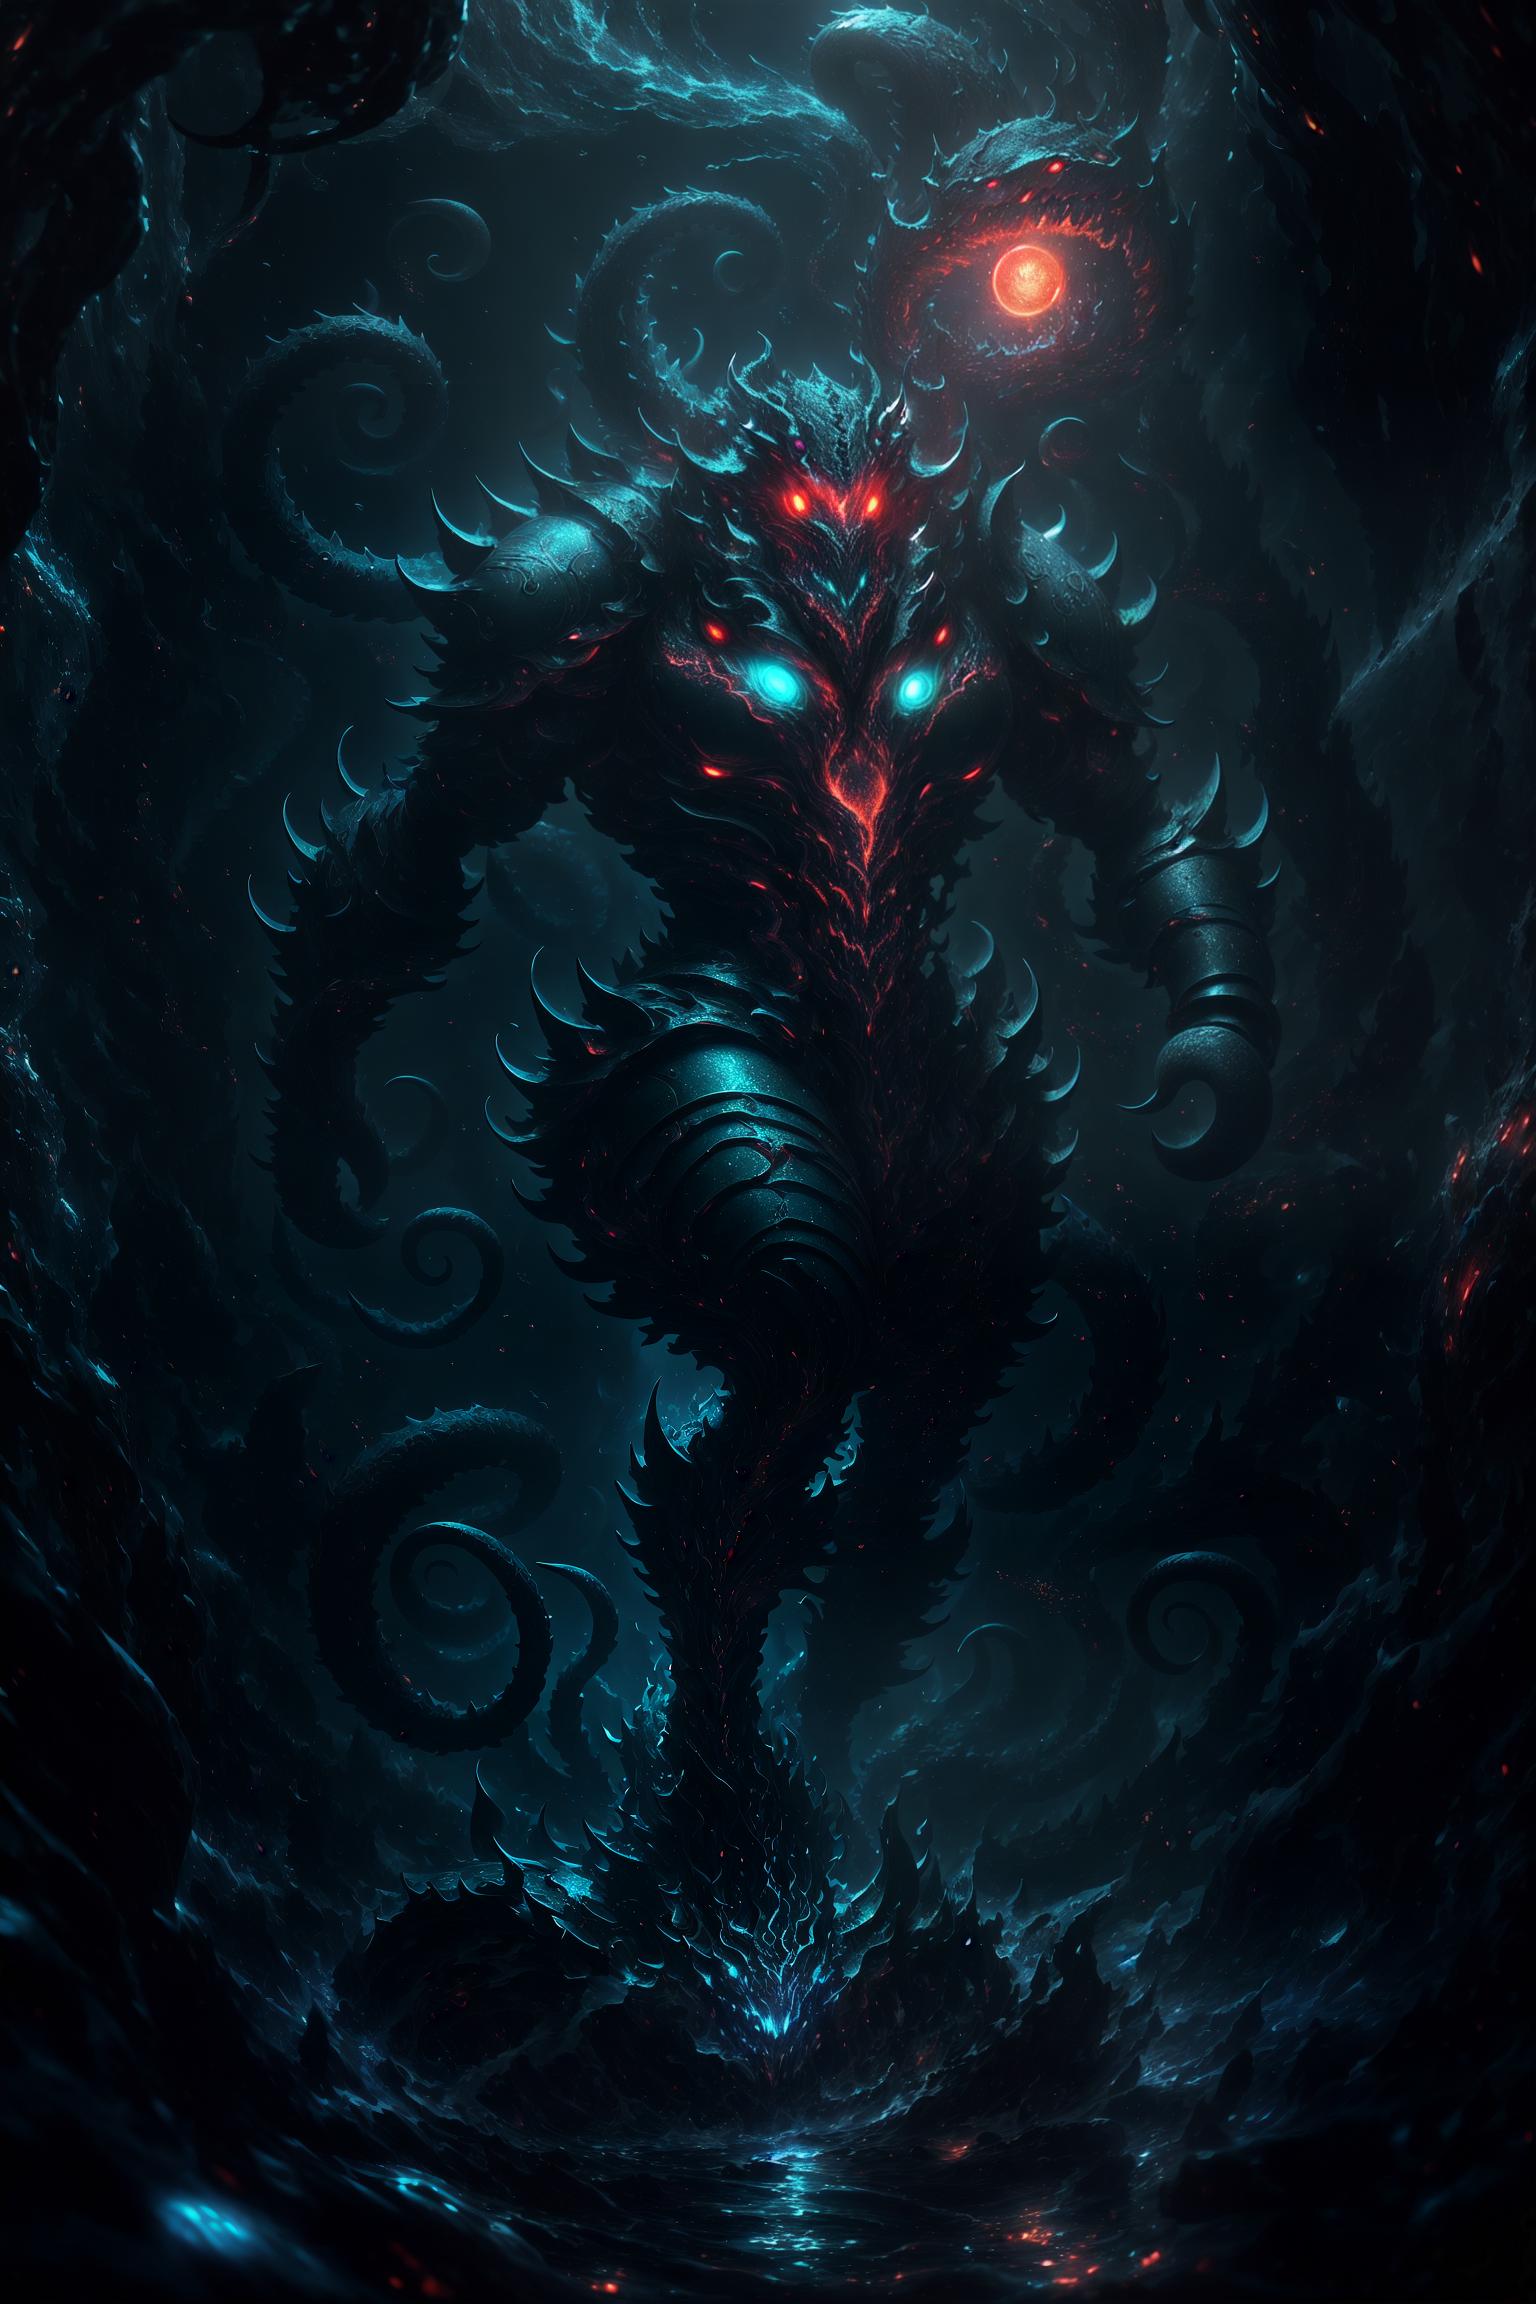  Kraken, (giant tentacles:1.2), (body mainly composed of a set of huge, strong, and flexible tentacles), (covered with suction cups and sharp claws), (wild eyes:1.0), (possessing wild and evil eyes), (emitting deep red or bright yellow light), (as if twinkling in the dark), (tornado like mouth:1.0), (has a tornado shaped mouth that rotates open and closed), (showing its power as a deep sea monster), (demonic skin:1.0), (covered in thick, slippery, and highly waterproof skin), (deep sea environment:1.2), (main scene is dark, cold, and high pressure deep sea), (environment includes the pitch black abyss like seabed), (sparse bioluminescent creatures), (ship element:1.0), (story set at night), (depicting a ship being attacked and about to sink) hyperrealistic, full body, detailed clothing, highly detailed, cinematic lighting, stunningly beautiful, intricate, sharp focus, f/1. 8, 85mm, (centered image composition), (professionally color graded), ((bright soft diffused light)), volumetric fog, trending on instagram, trending on tumblr, HDR 4K, 8K